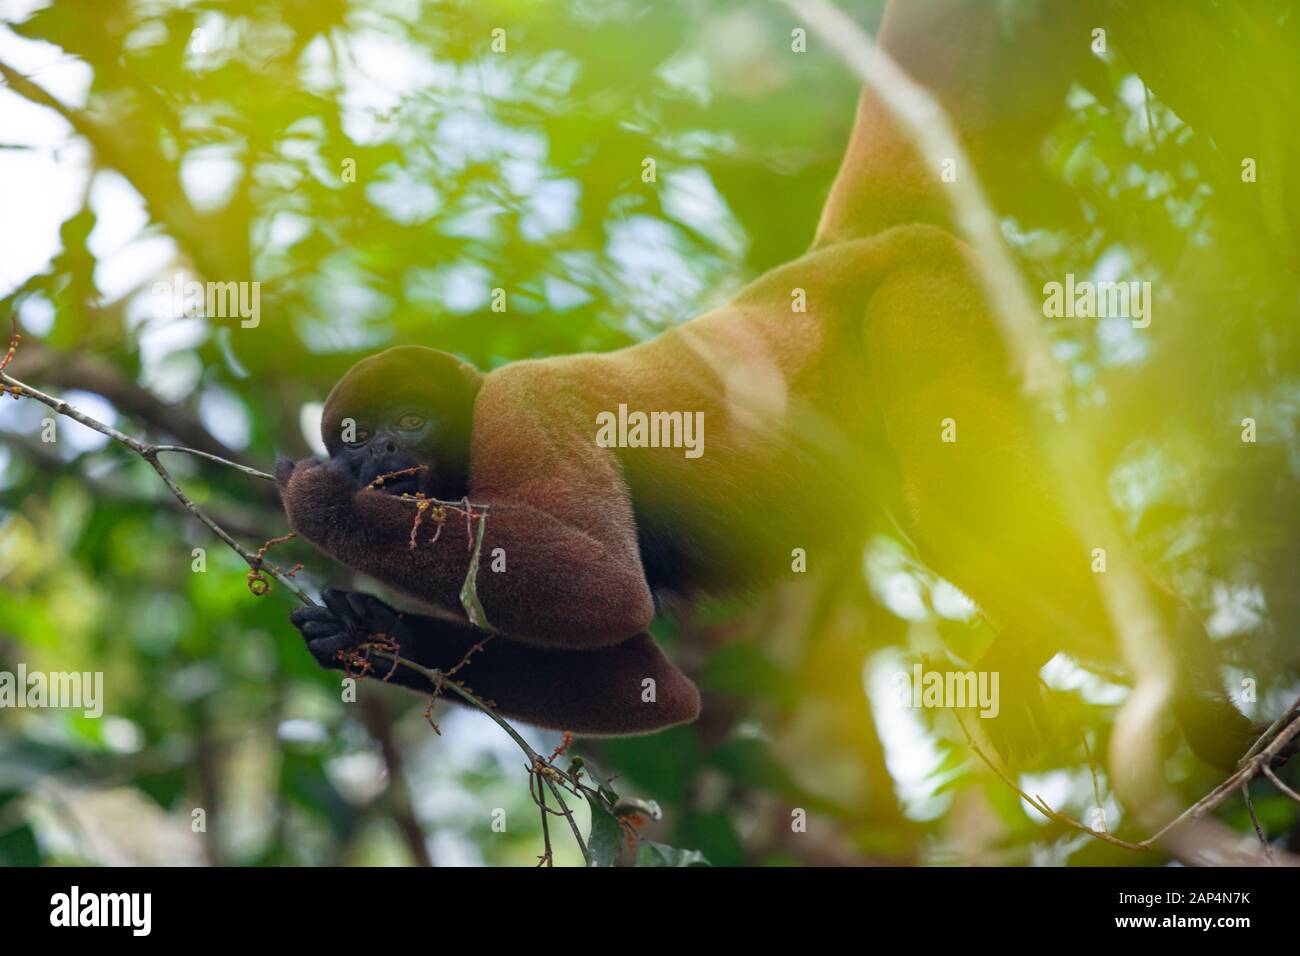 Woolen monkey in nature, sitting on a tree, Amazon river, green blur. Stock Photo